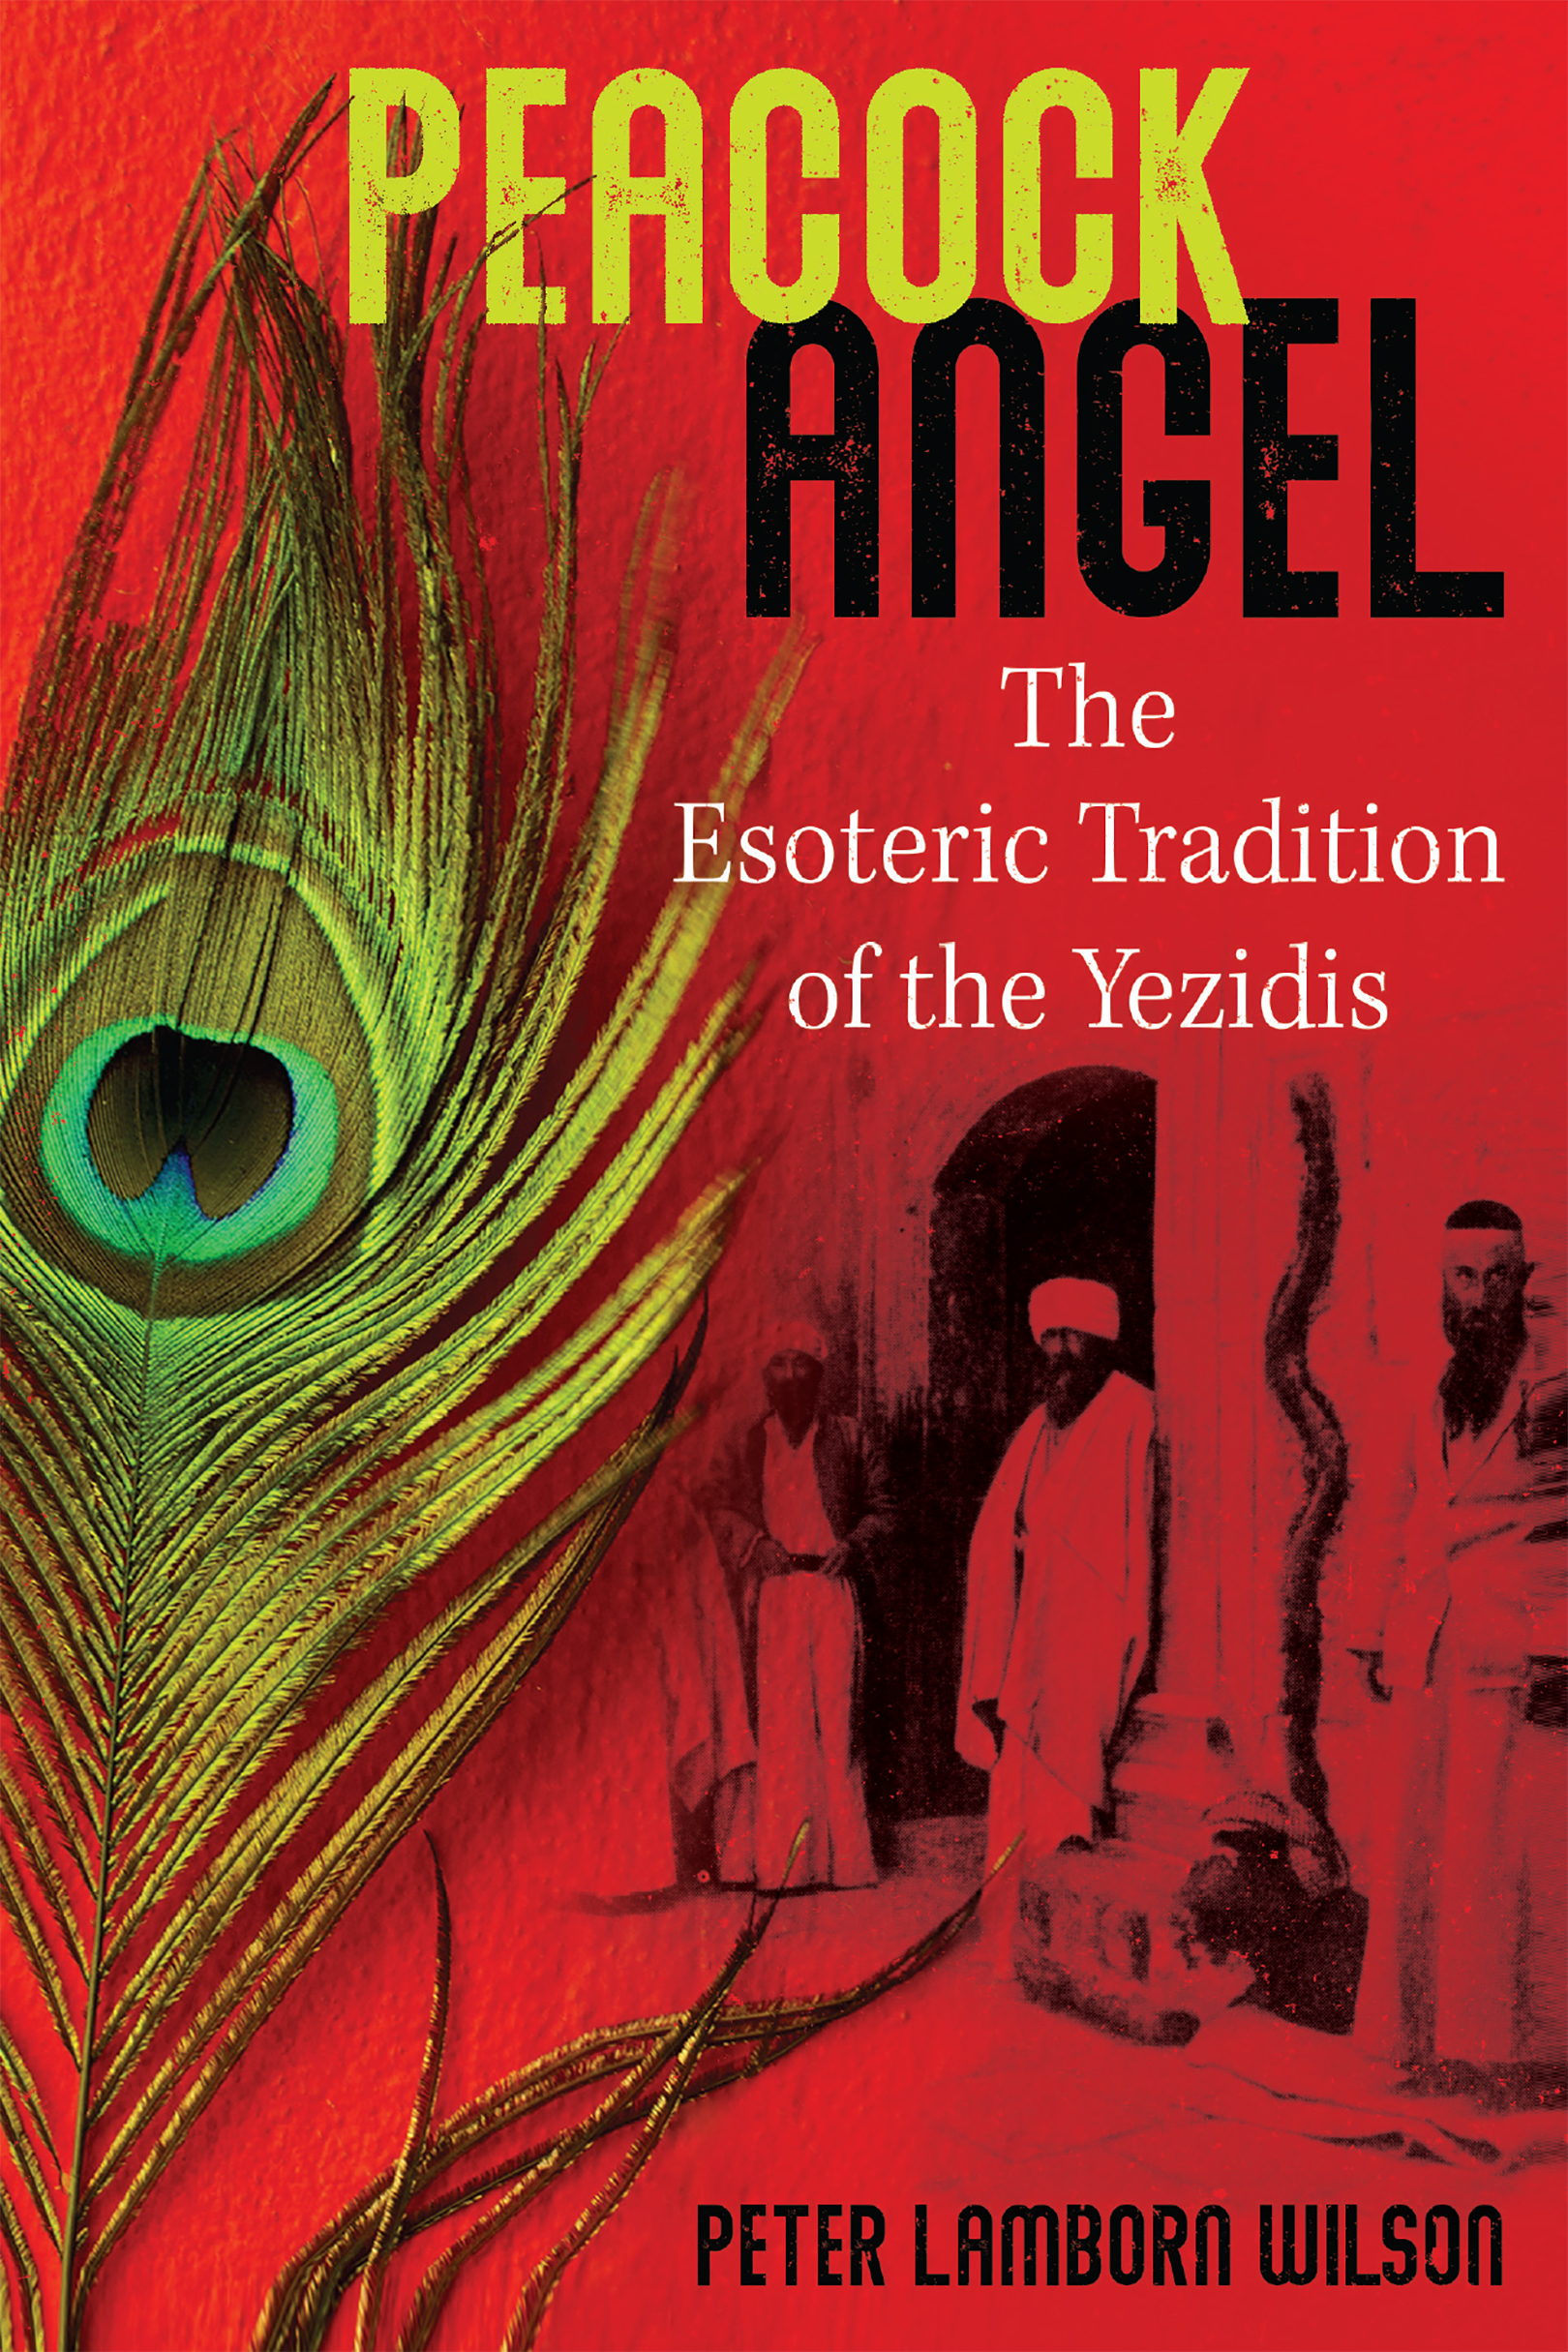 This book is dedicated to the Yezidi martyrs PEACOCK ANGEL - photo 1